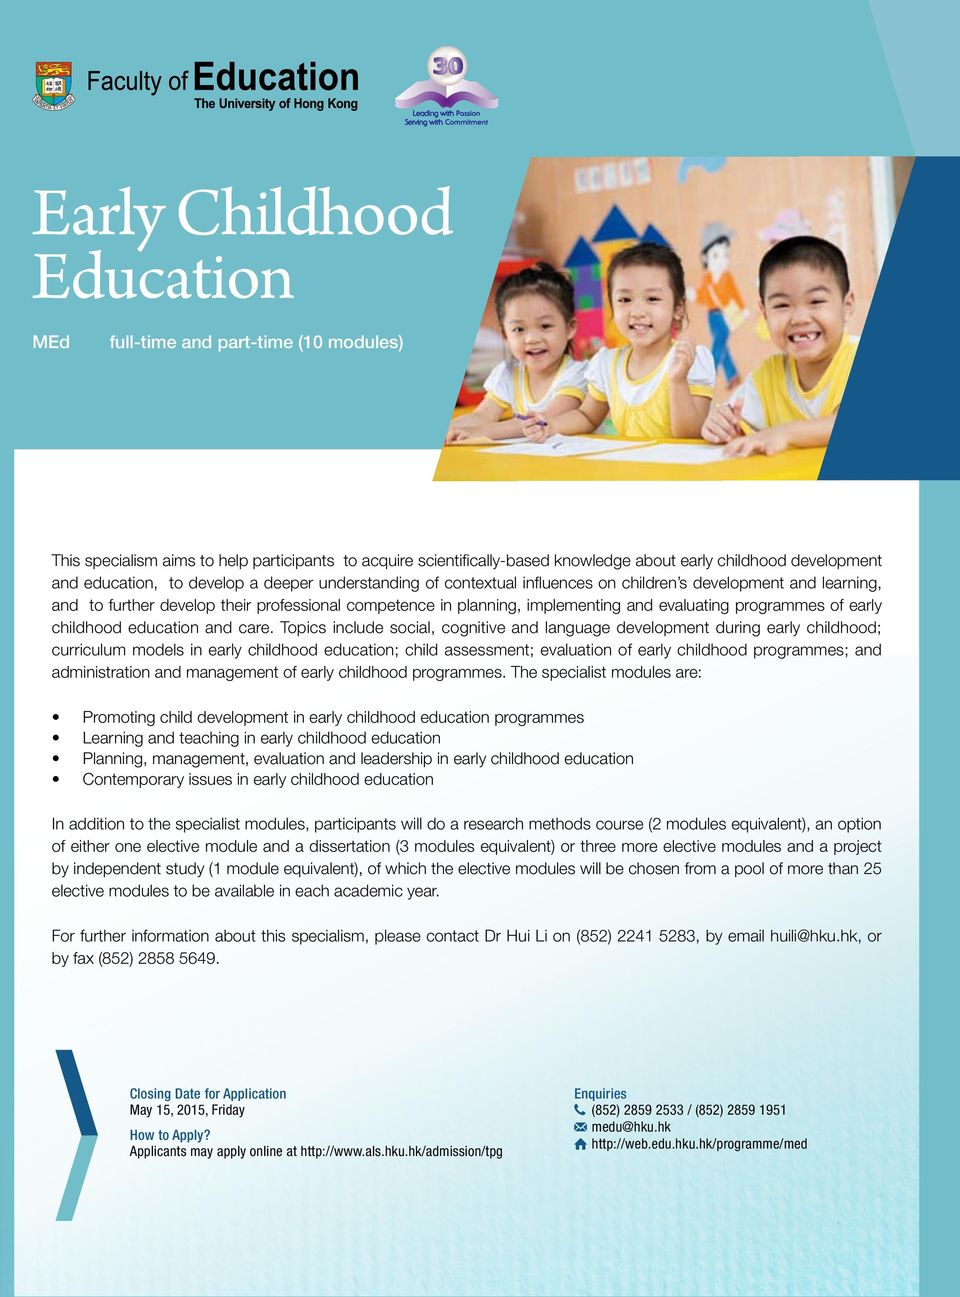 programmes of early childhood education and care.